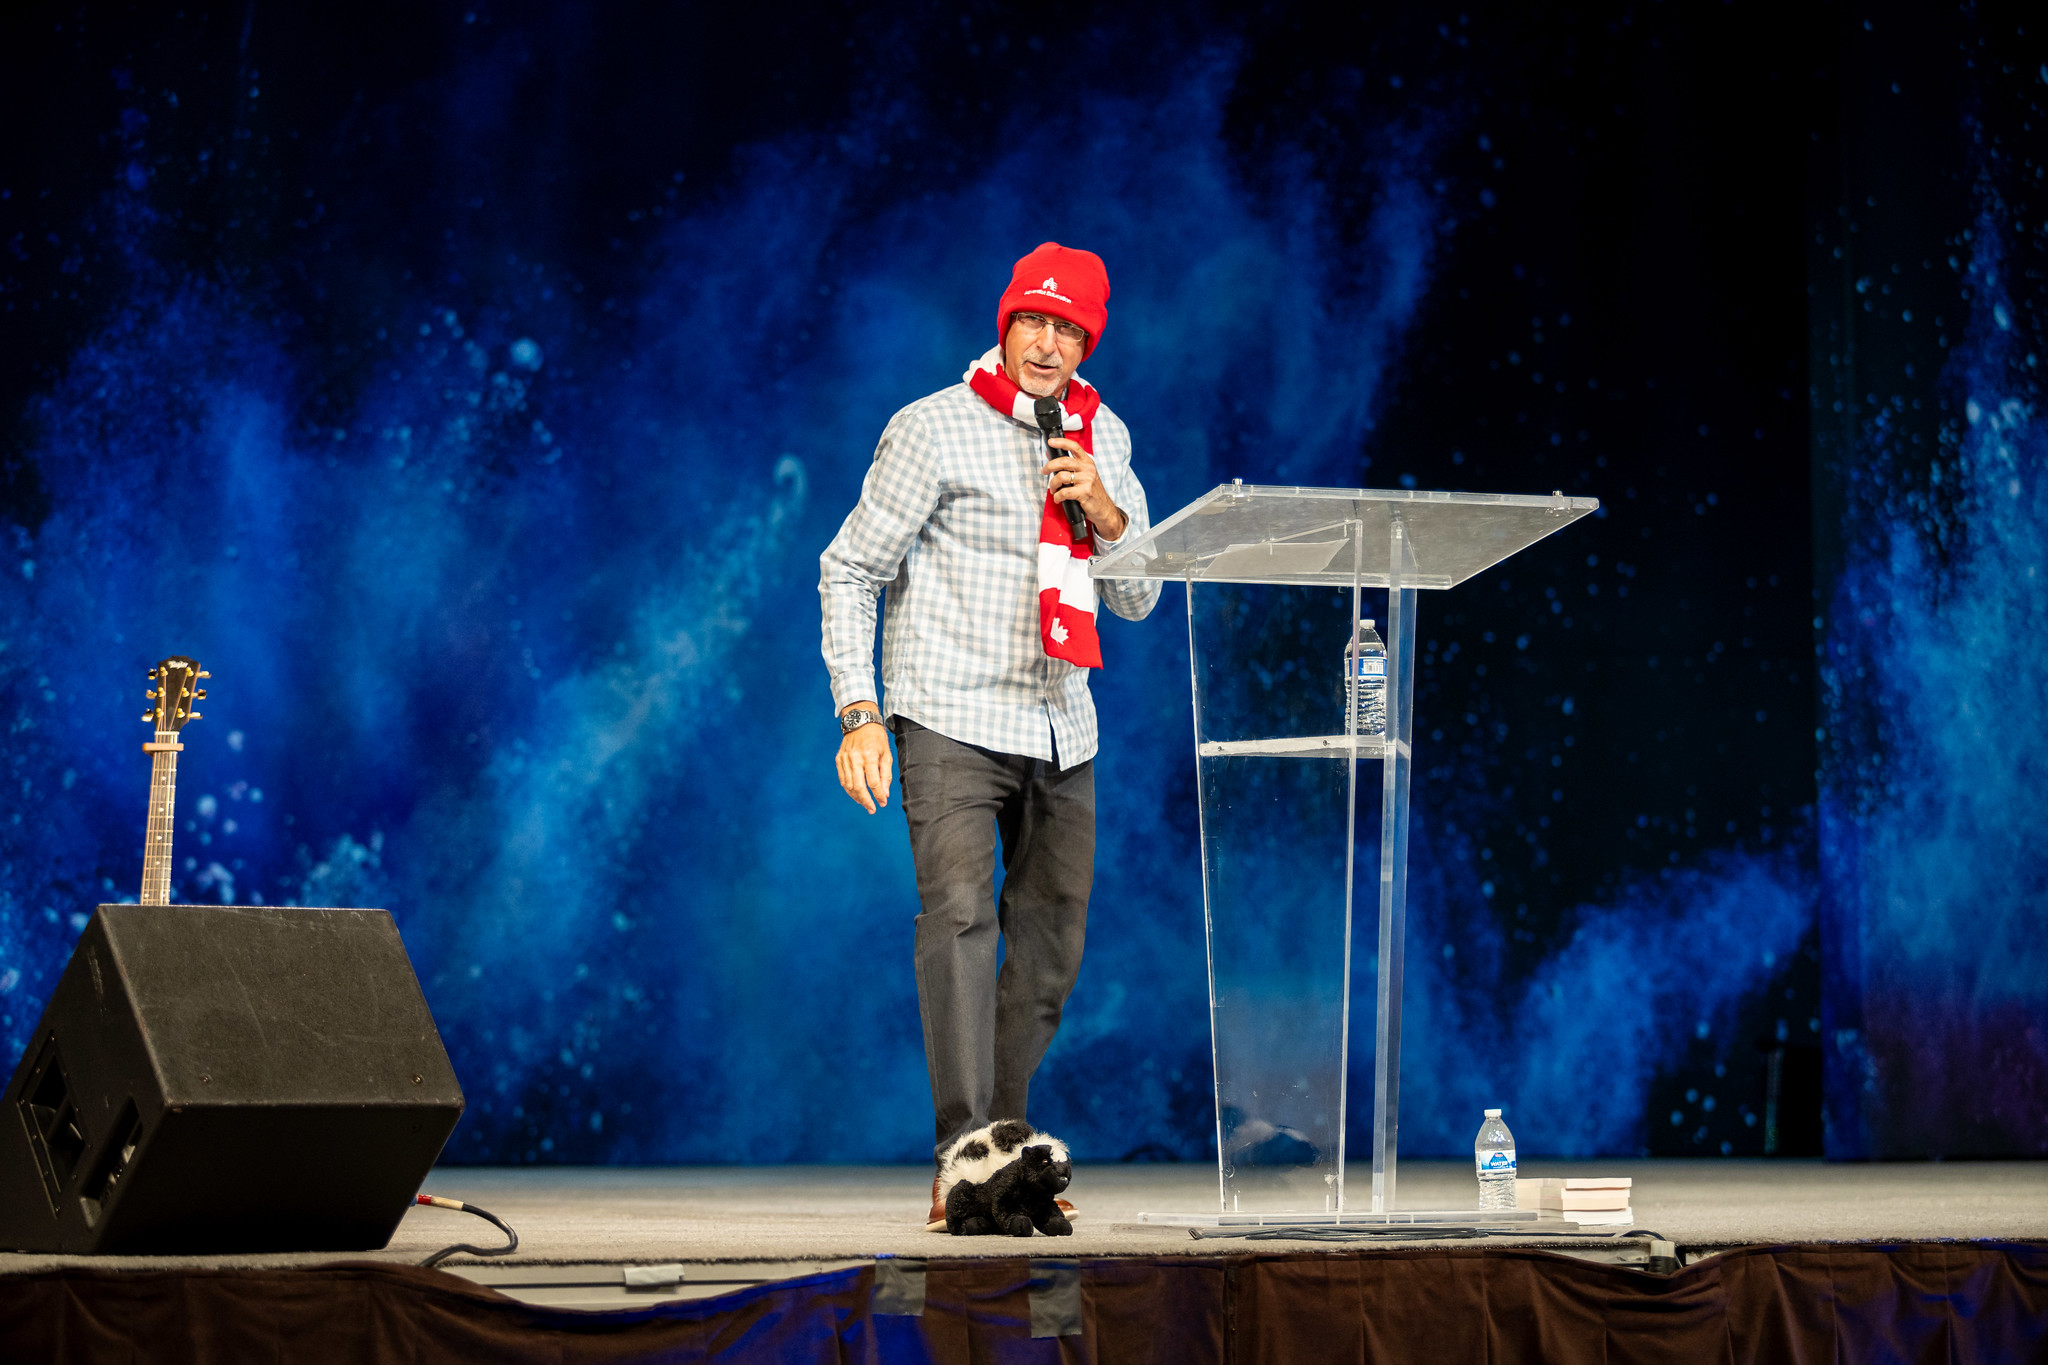 Phil Callaway, comedian and radio host addresses the educators' at the "Something Better" convention in Phoenix, Arizona.